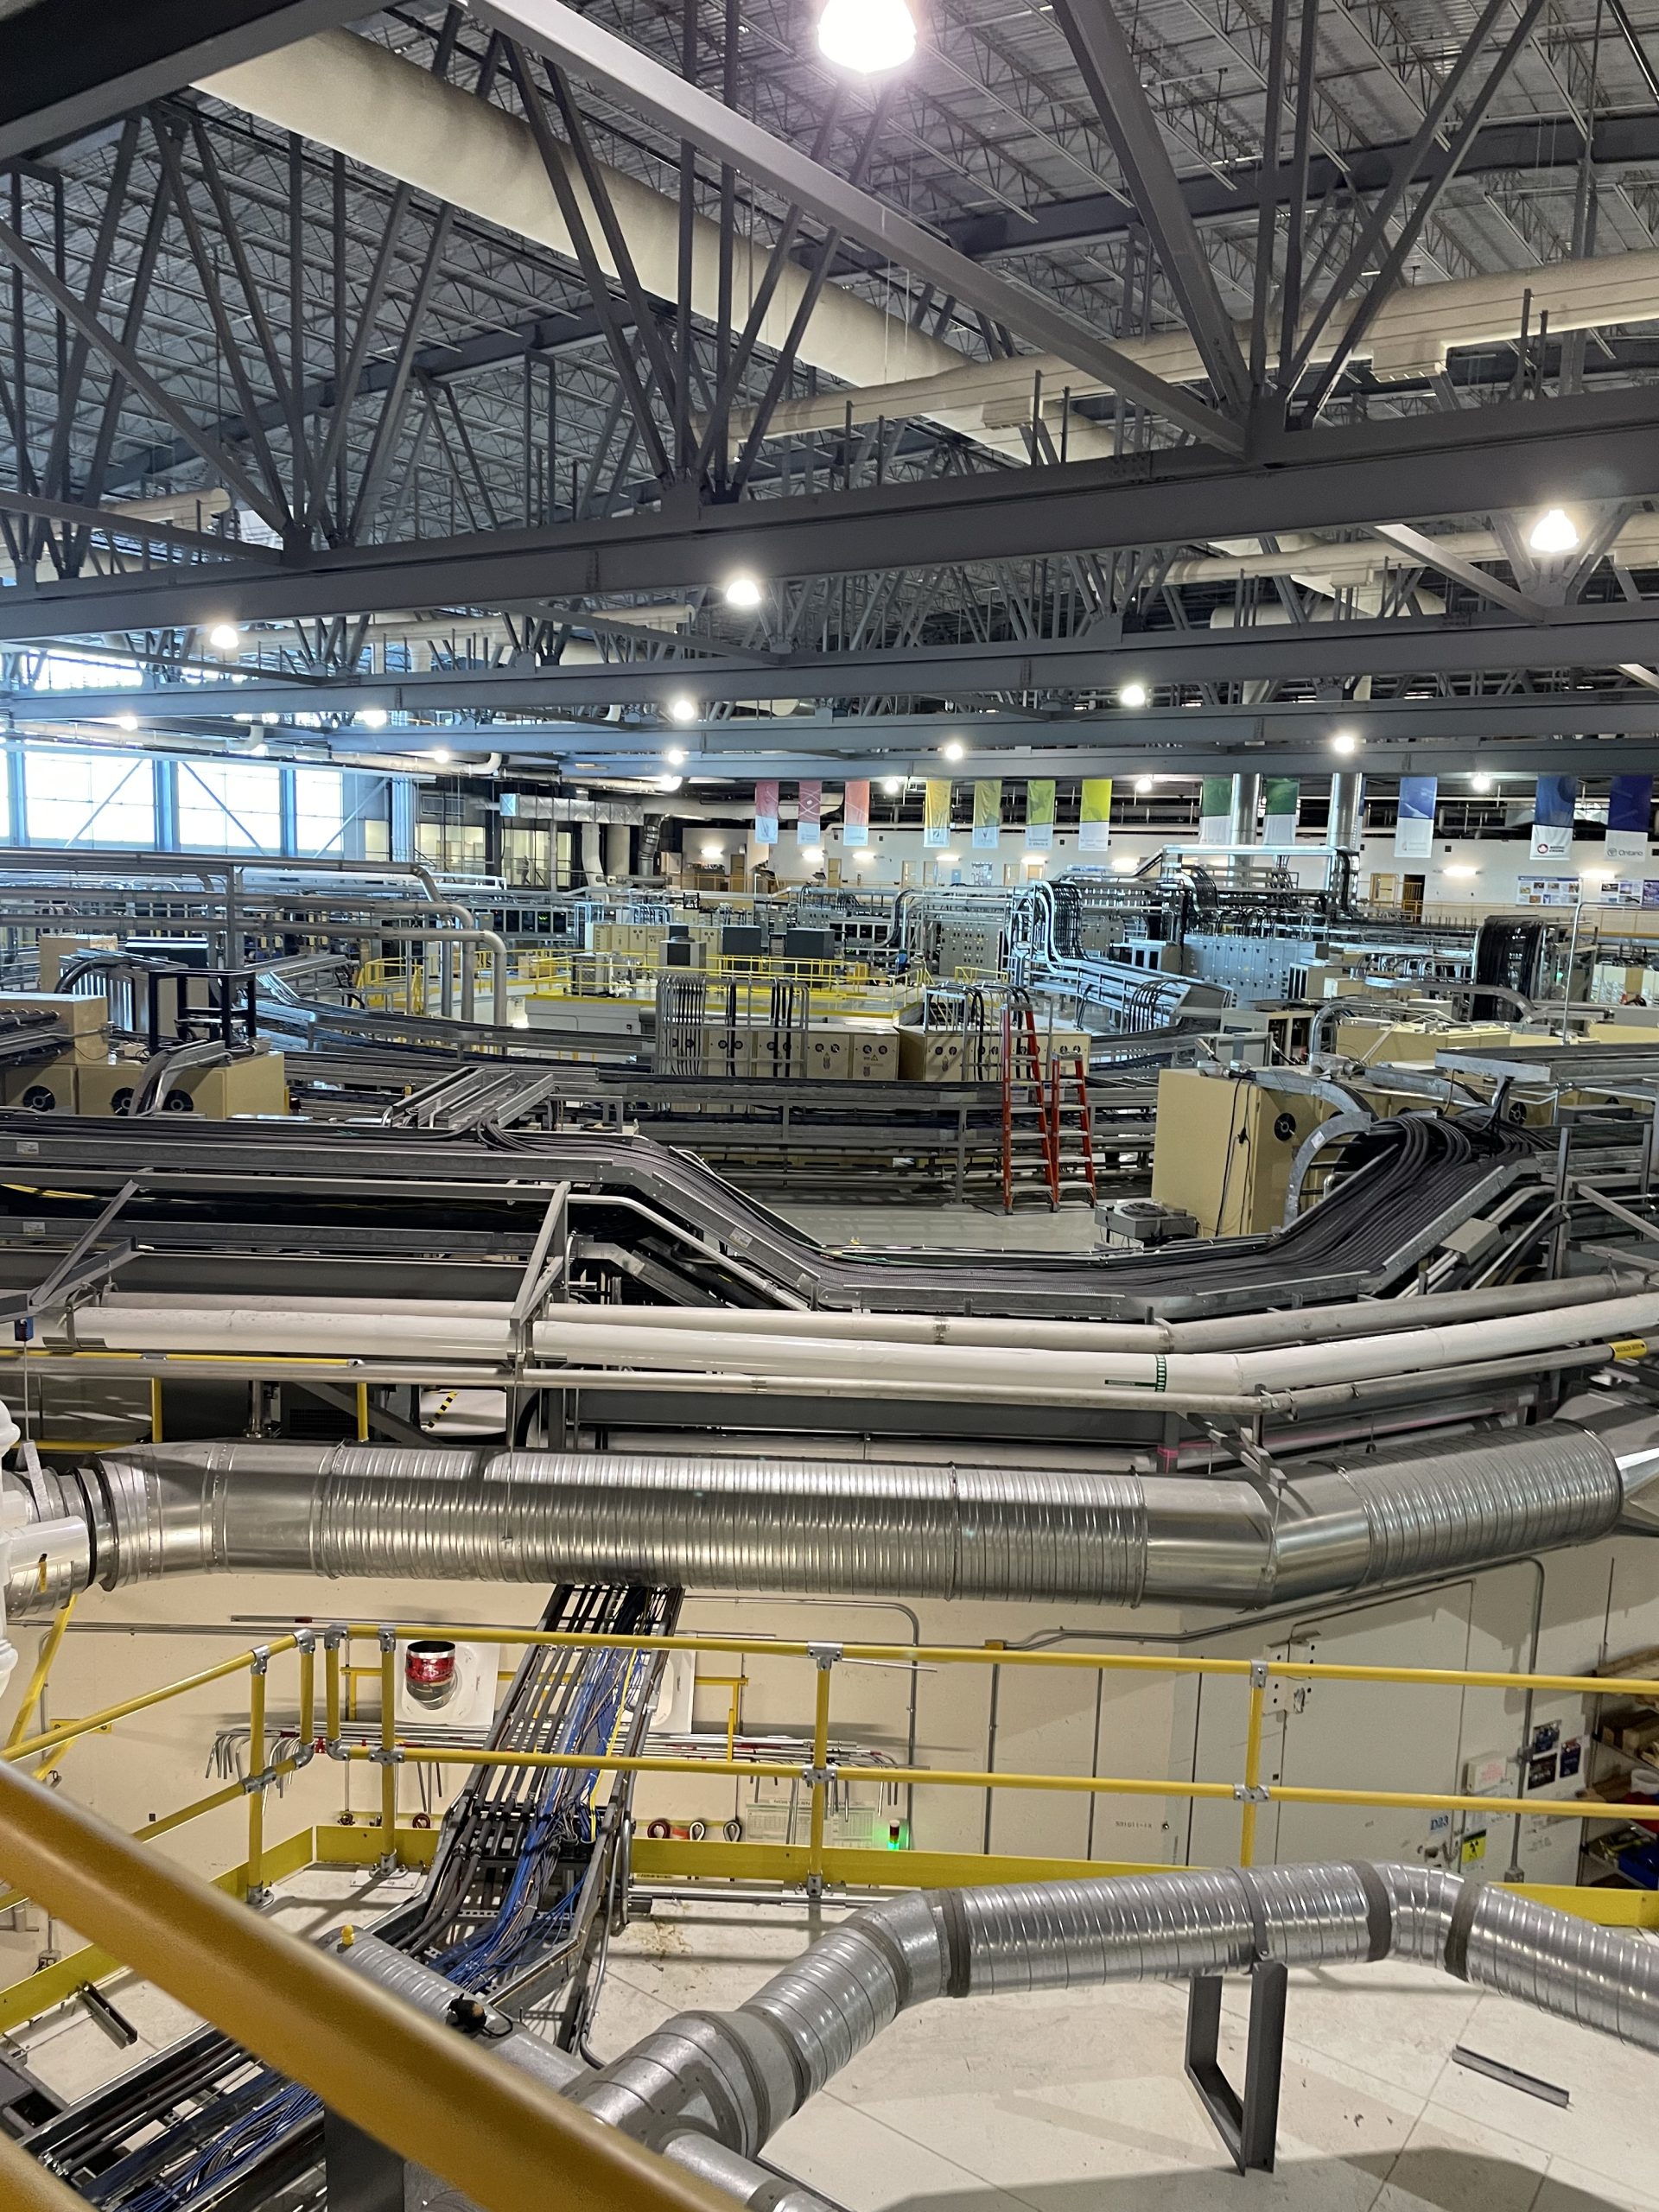 Large space of equipment at the Canadian Light Source facility.